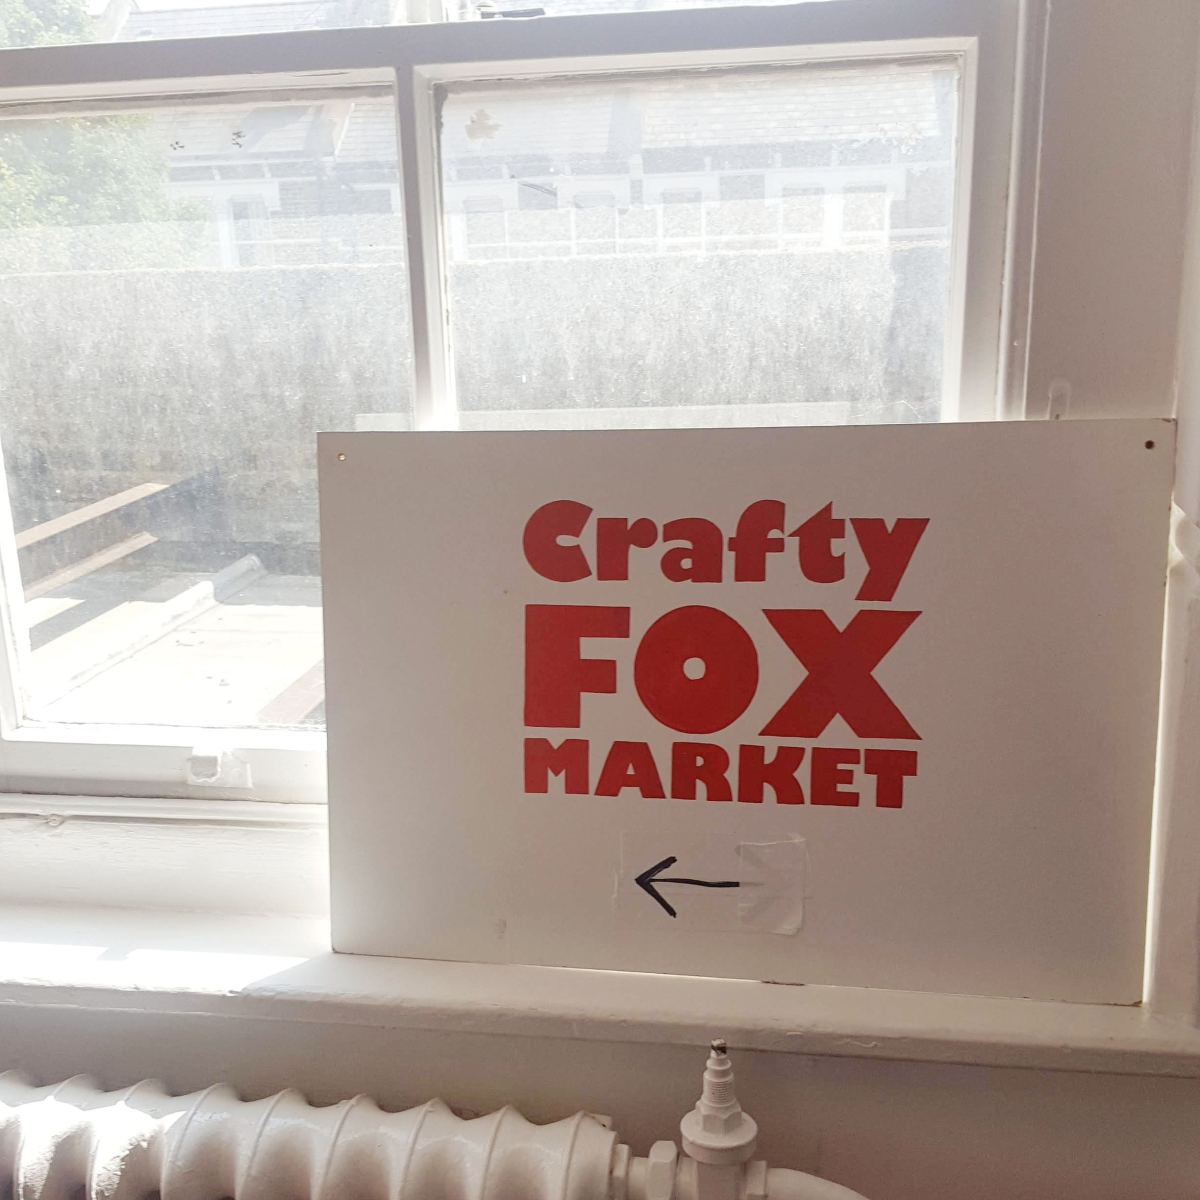 What does a bad craft market day do to your confidence after a a miserable day of zero sales?